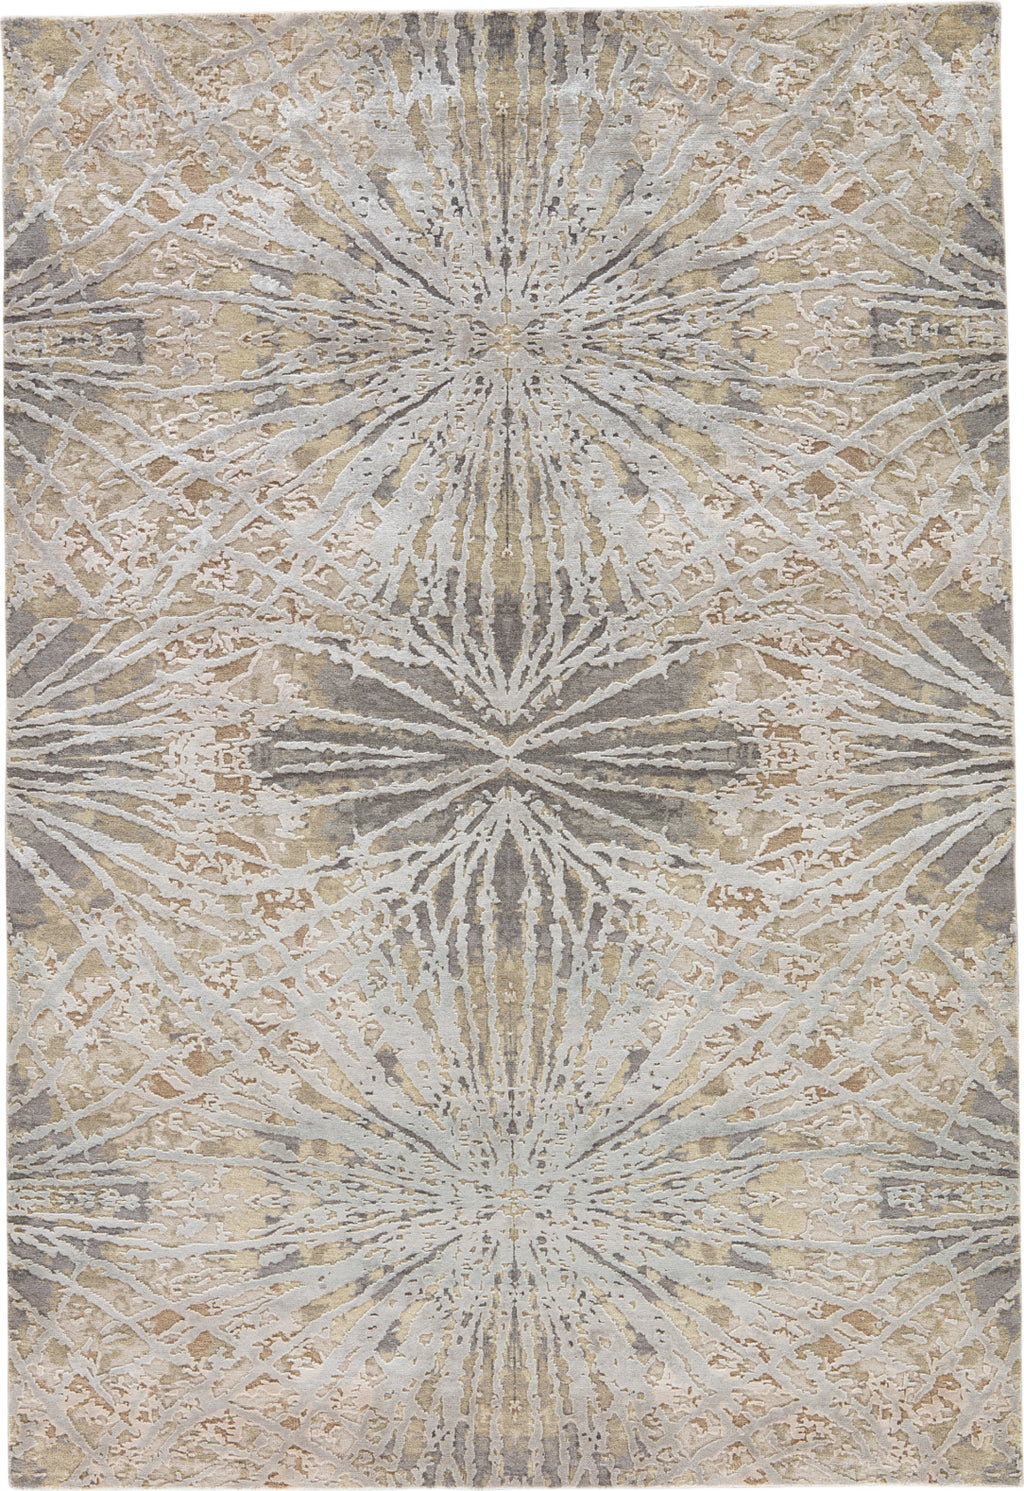 Jaipur Living Chaos Theory By Kavi Thea CKV25 Gray/Beige Area Rug - Top Down